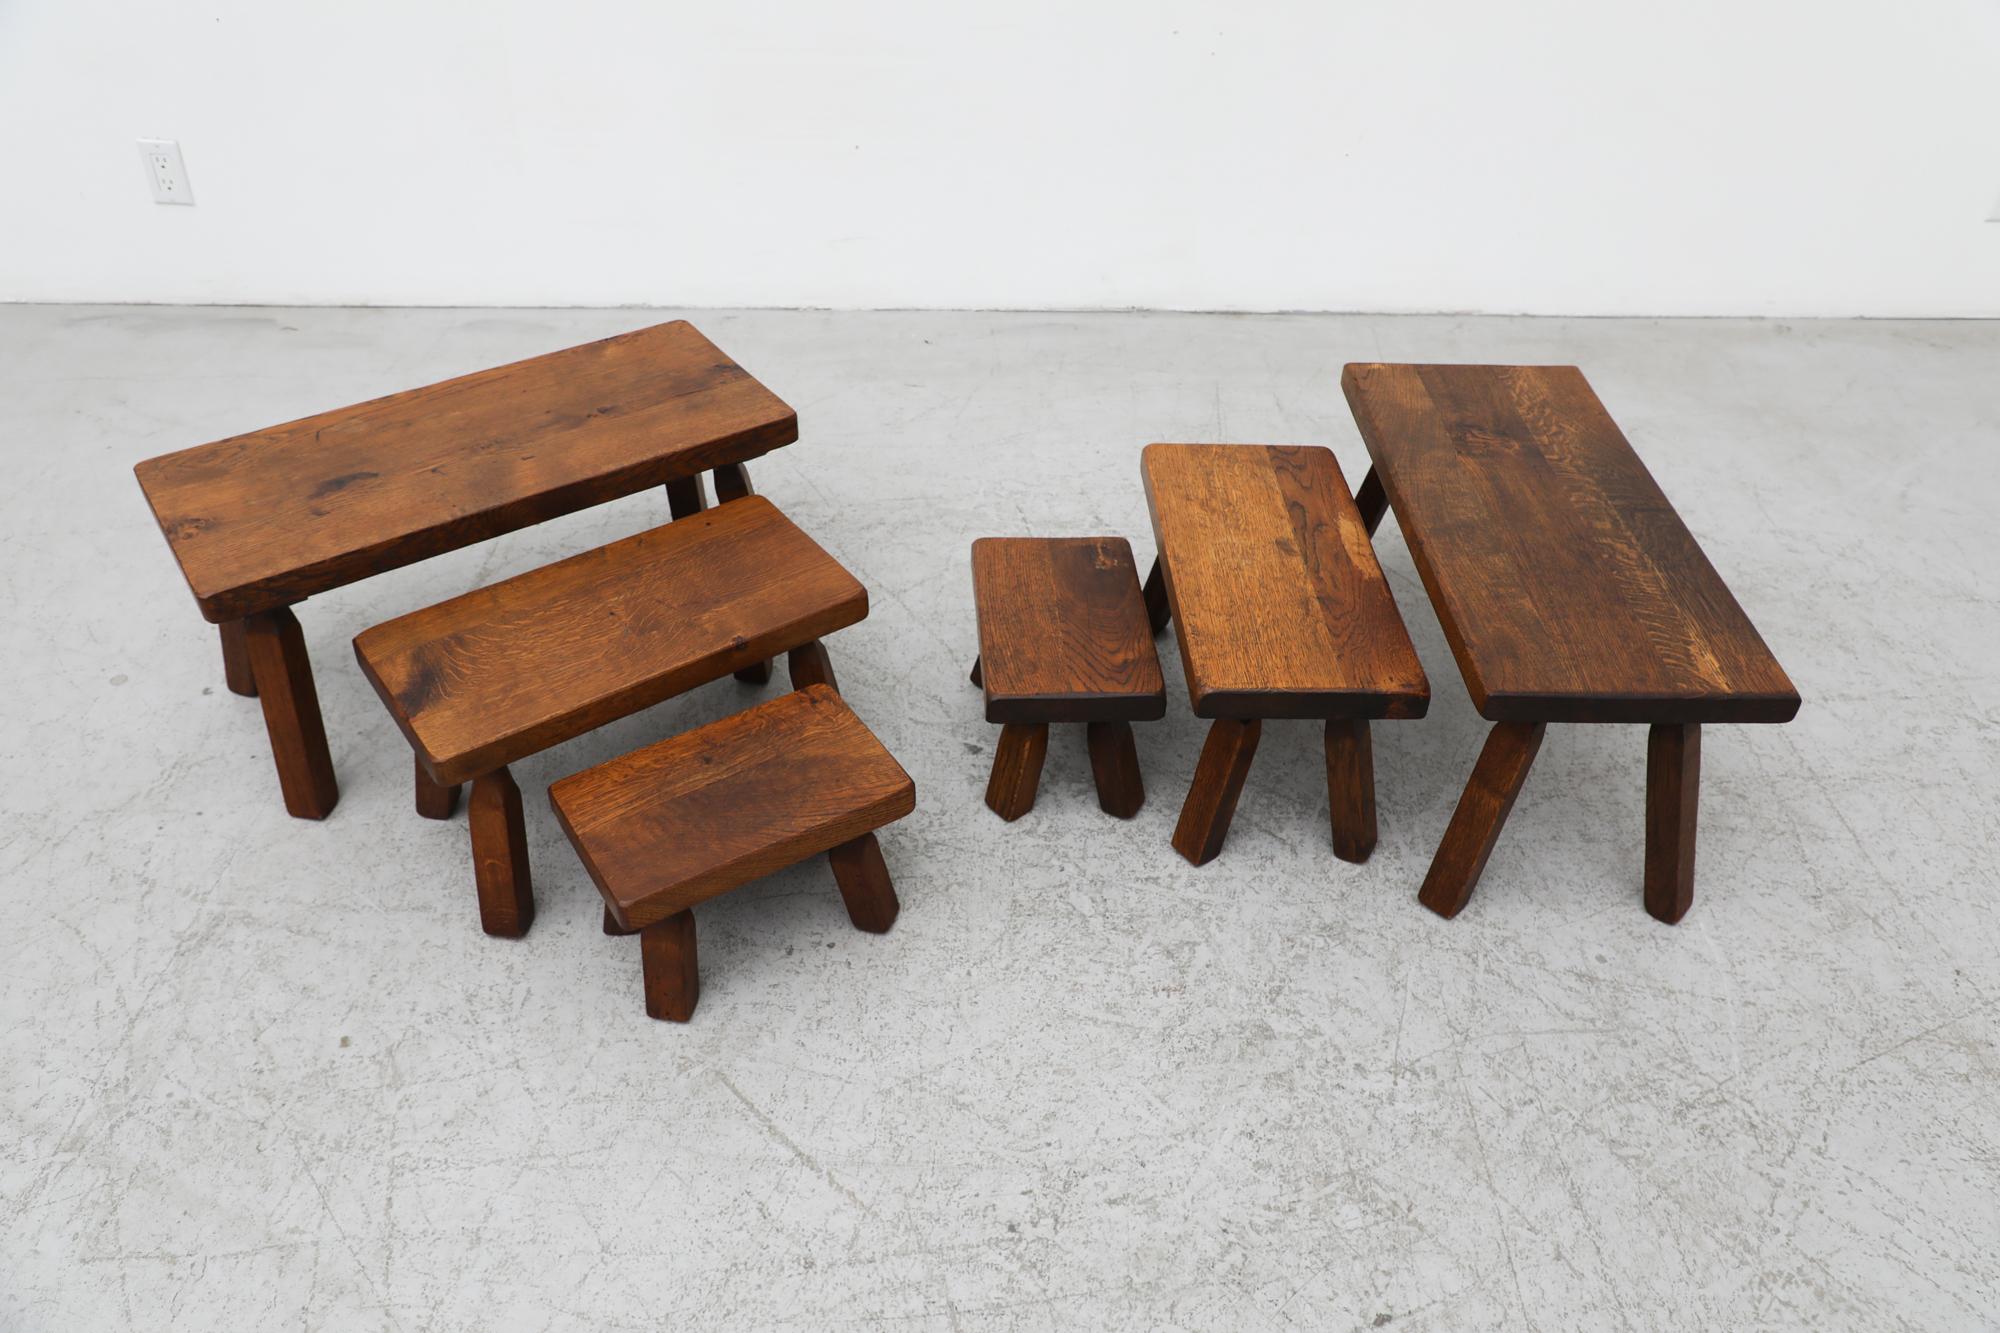 Dutch Pierre Chapo Inspired Brutalist Nesting Tables with Short Legs